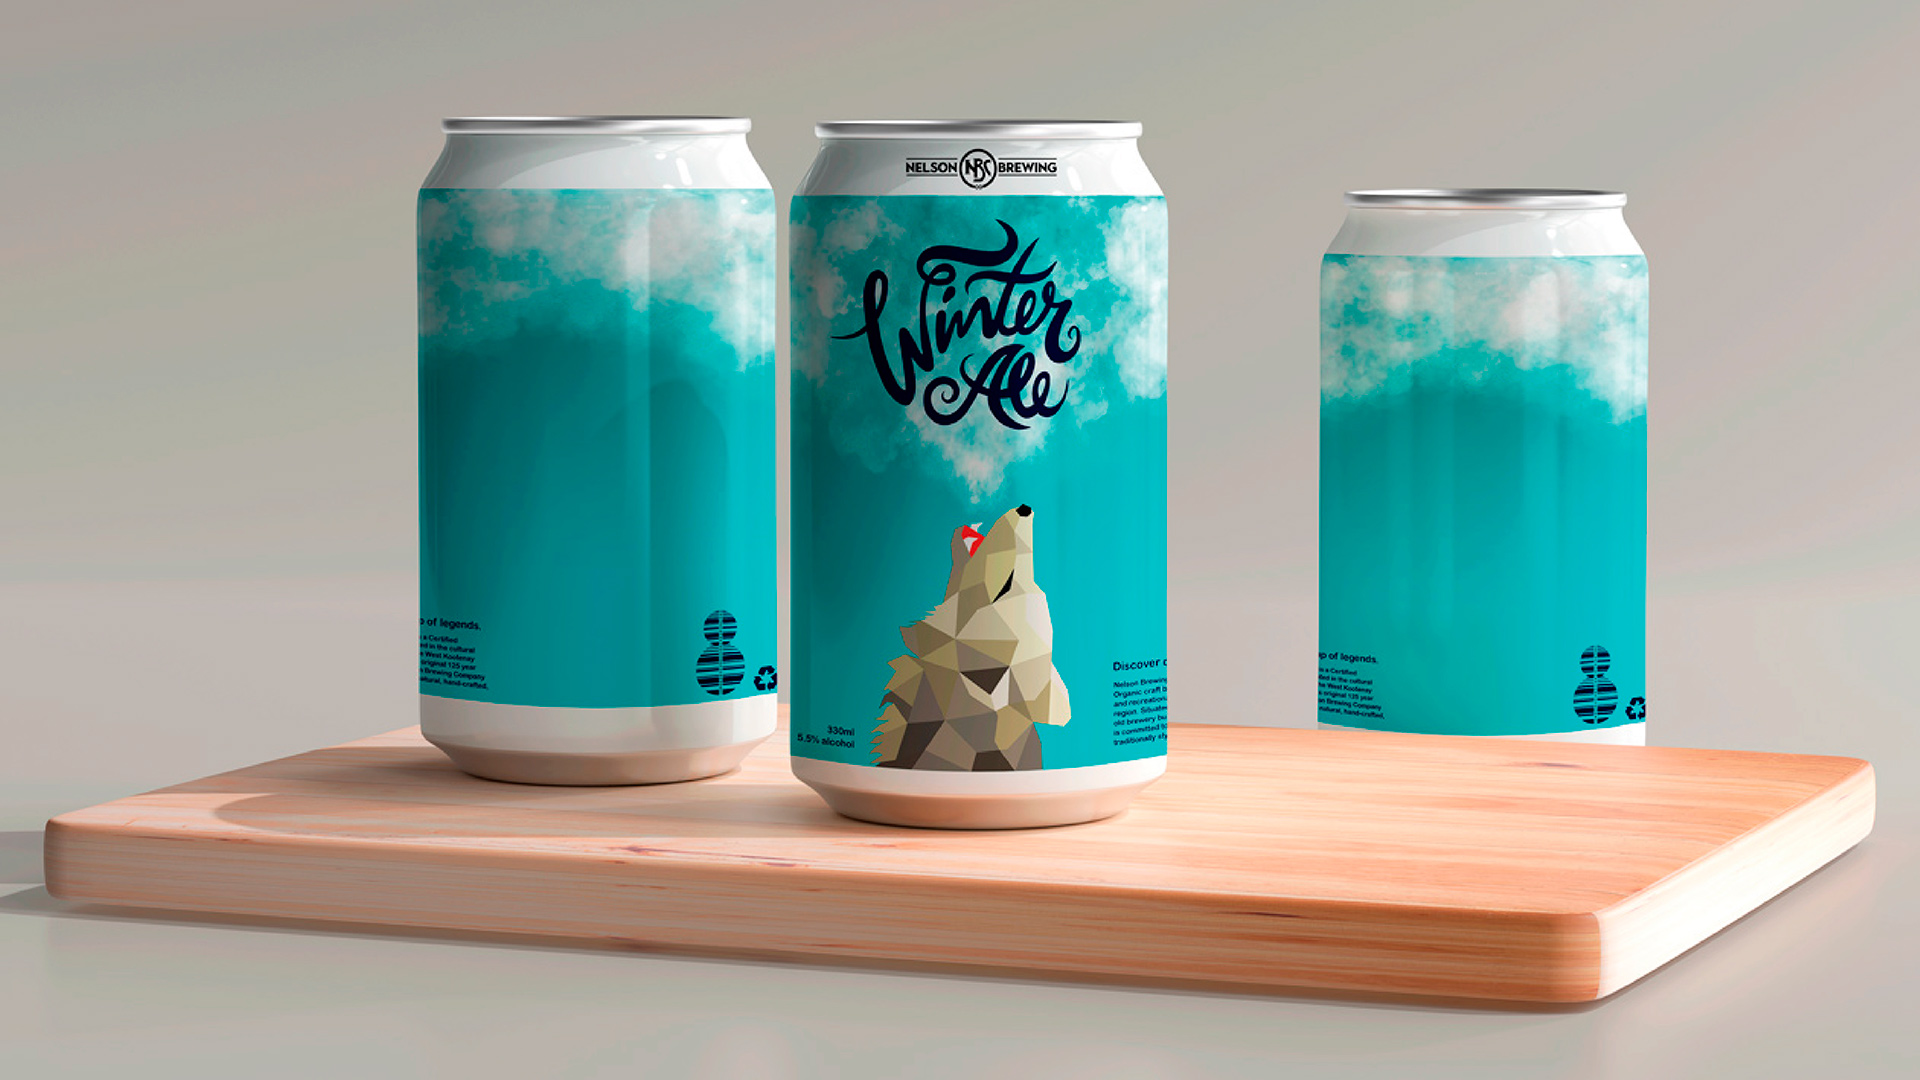 Beer cans mocked up with illustrations.